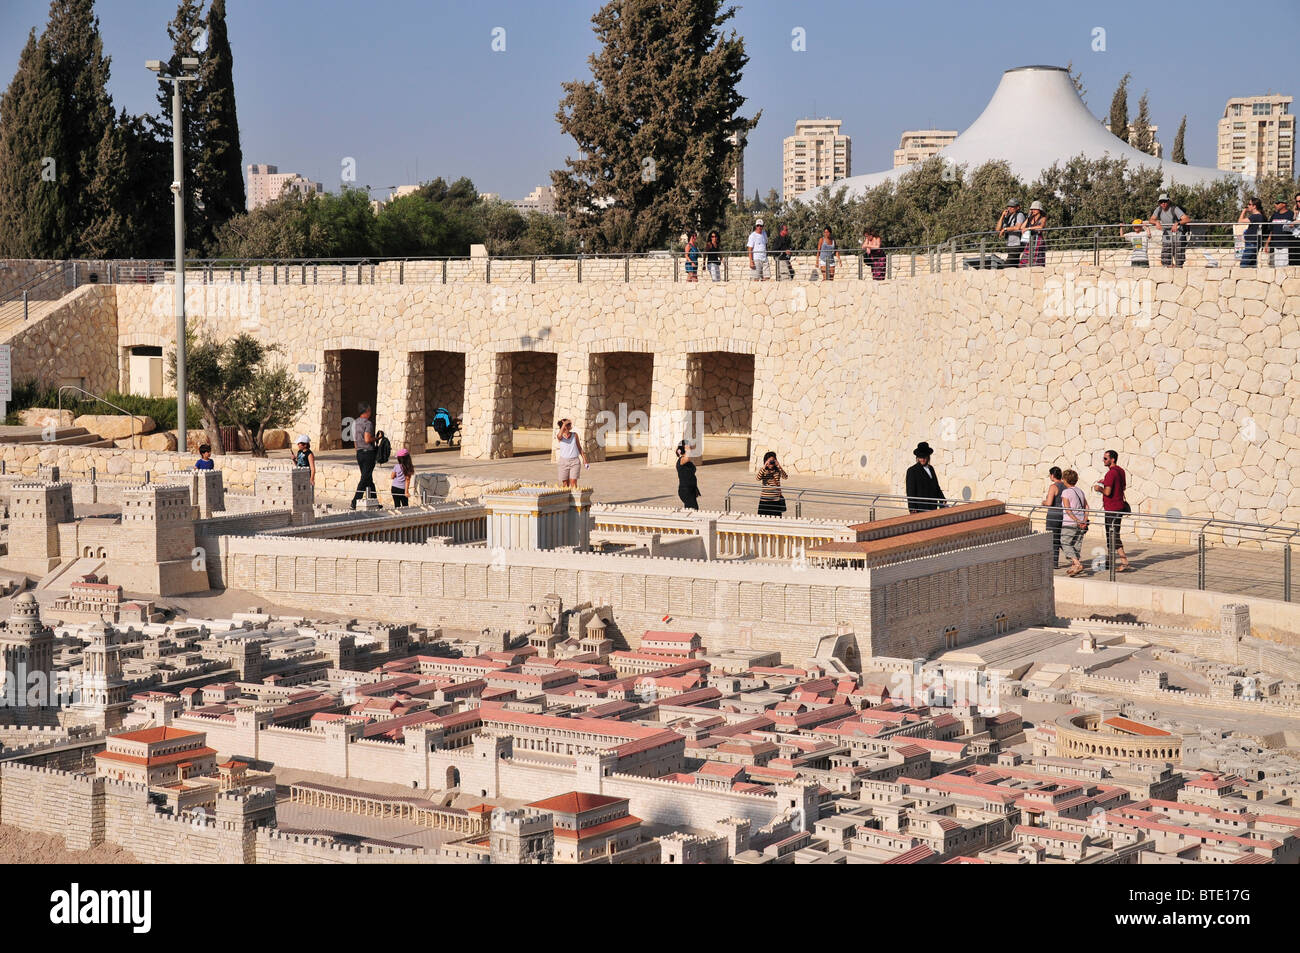 Israel, Jerusalem, Israel Museum. Model of Jerusalem in the late second temple period 66CE scale of 1:50. Stock Photo